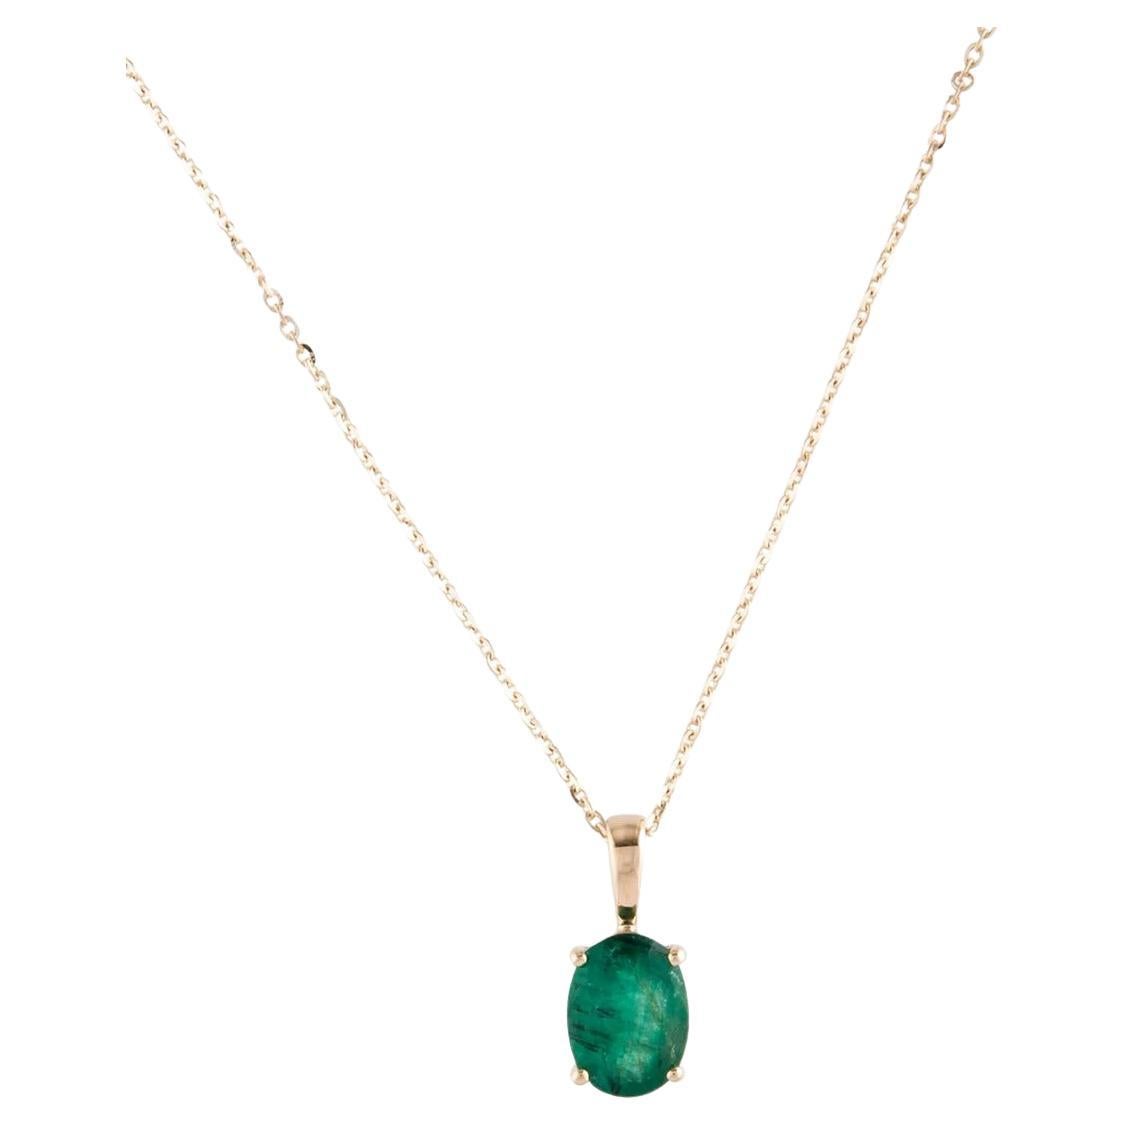 Vintage 14K Emerald Pendant Necklace - Timeless Elegance & Luxury Jewelry For Sale